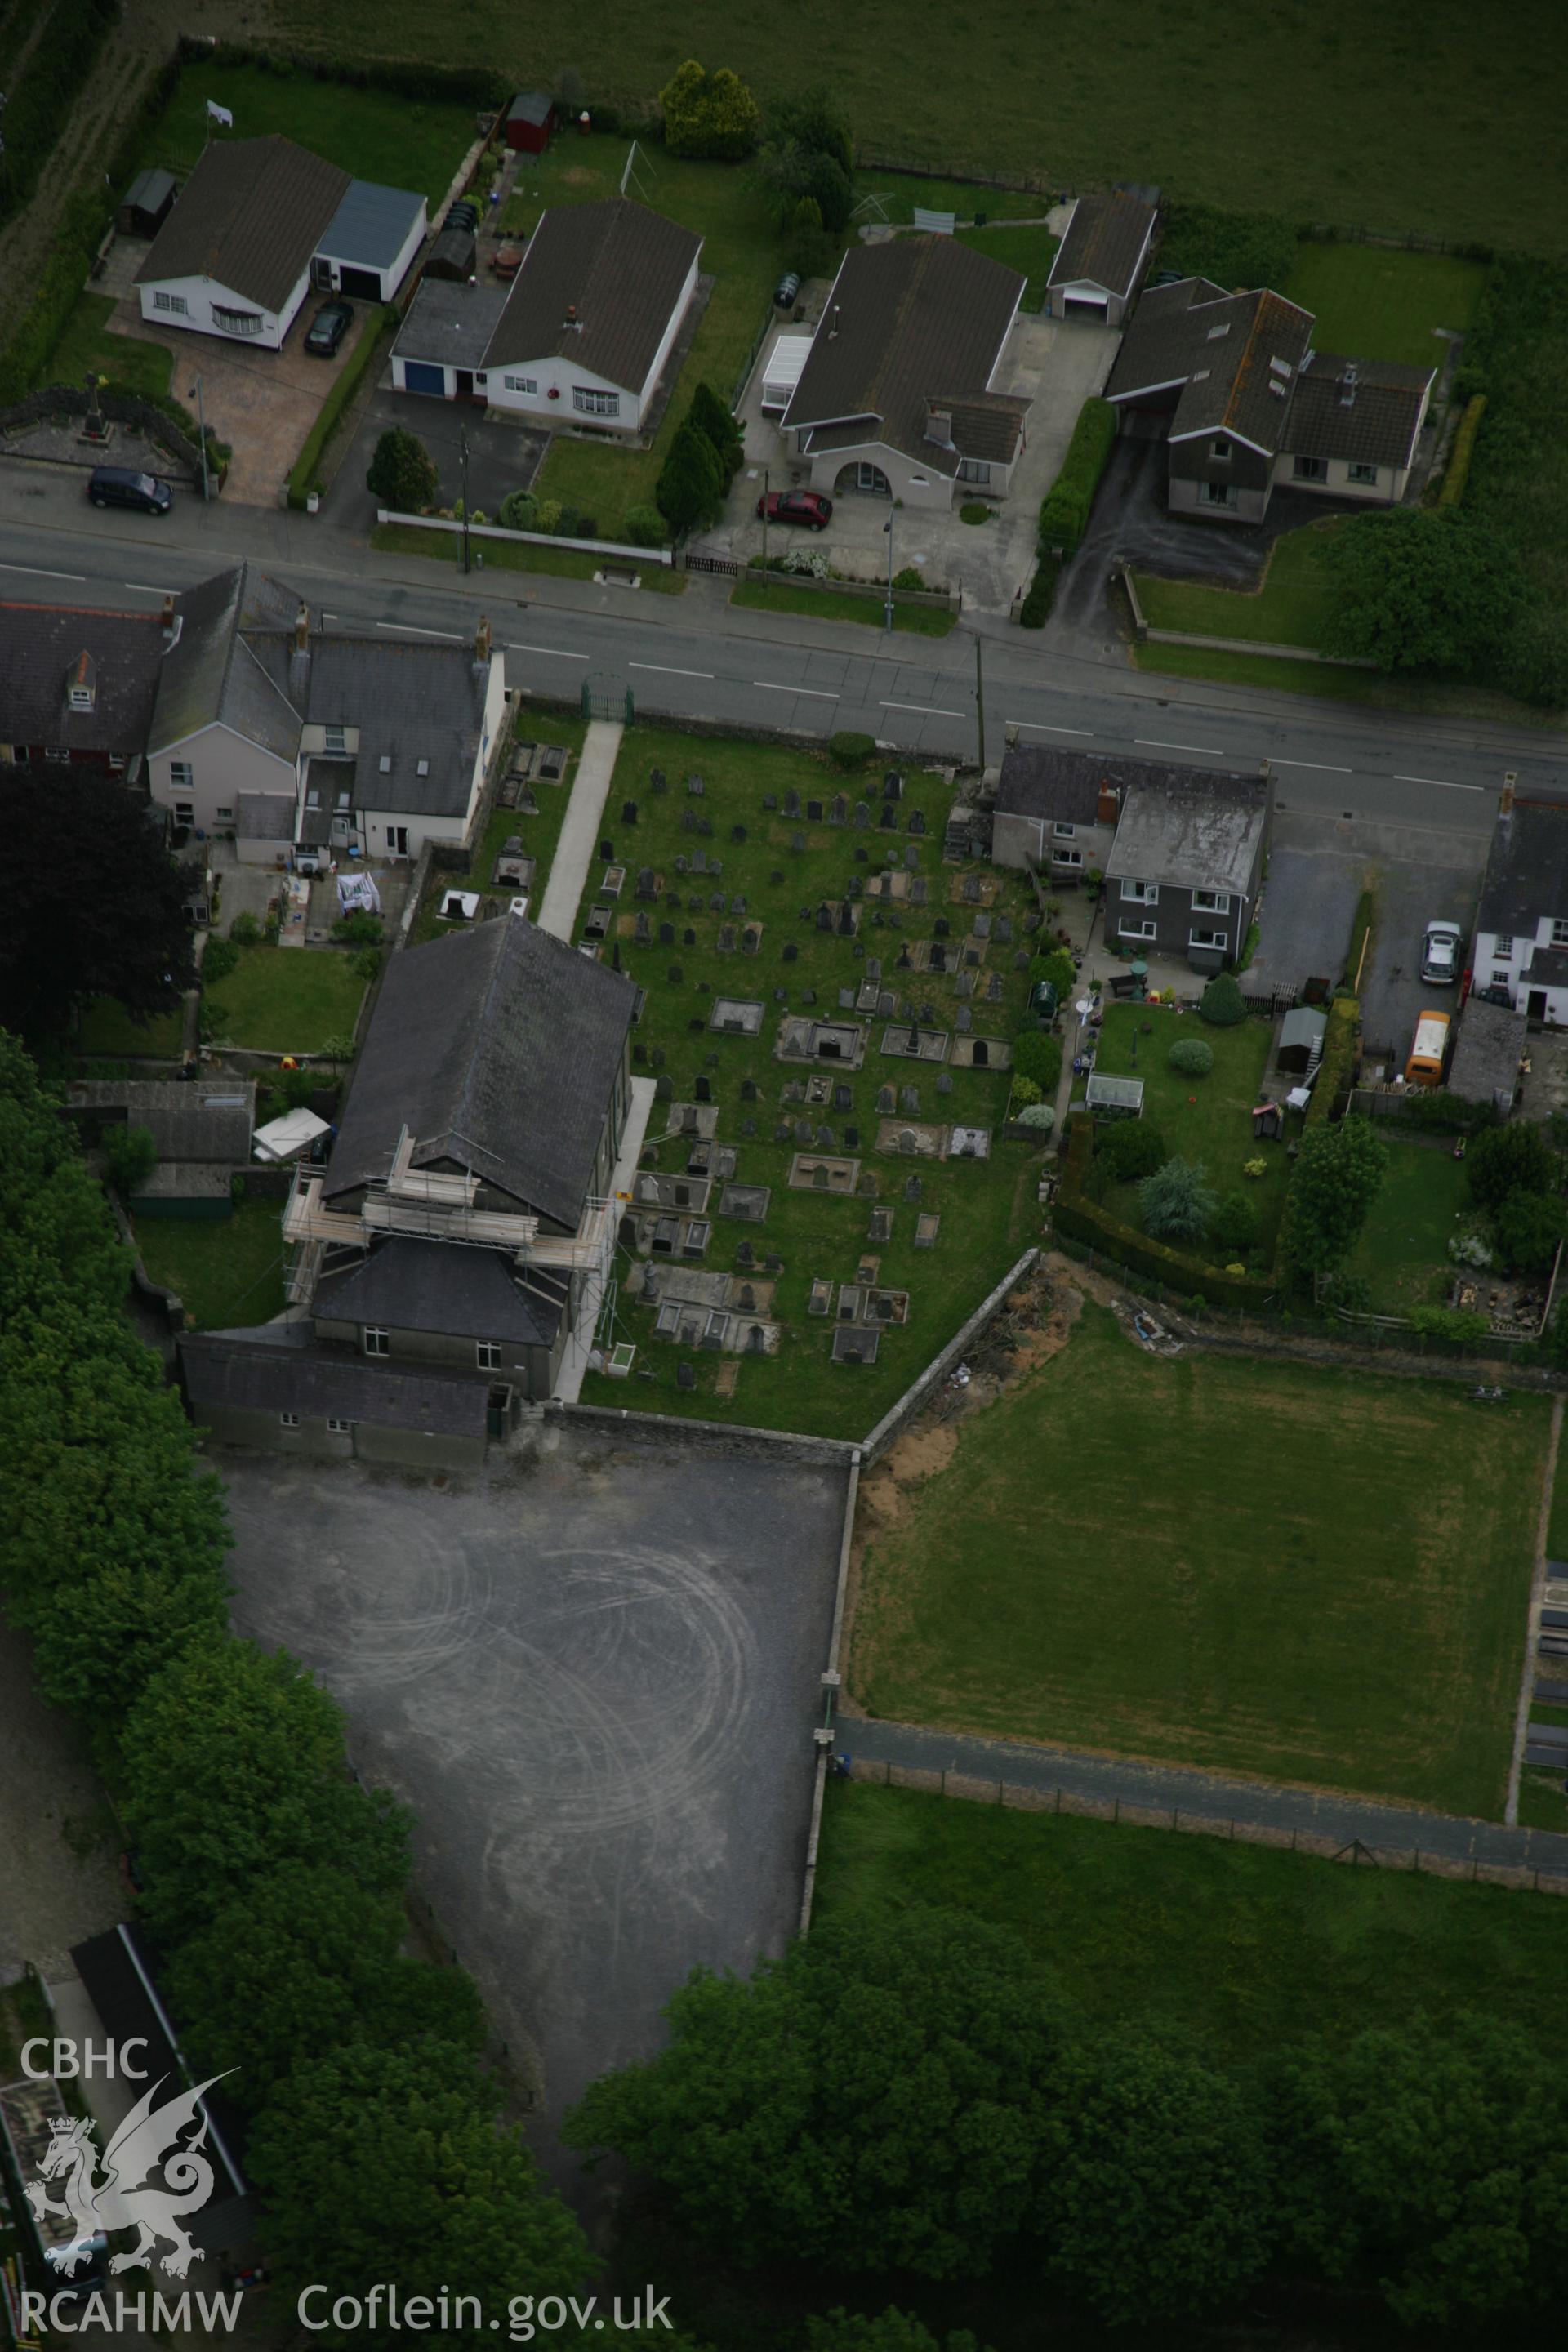 RCAHMW colour oblique aerial photograph of Pisgah Independent Chapel, Llandysilio, viewed from the south-west. Taken on 15 June 2006 by Toby Driver.